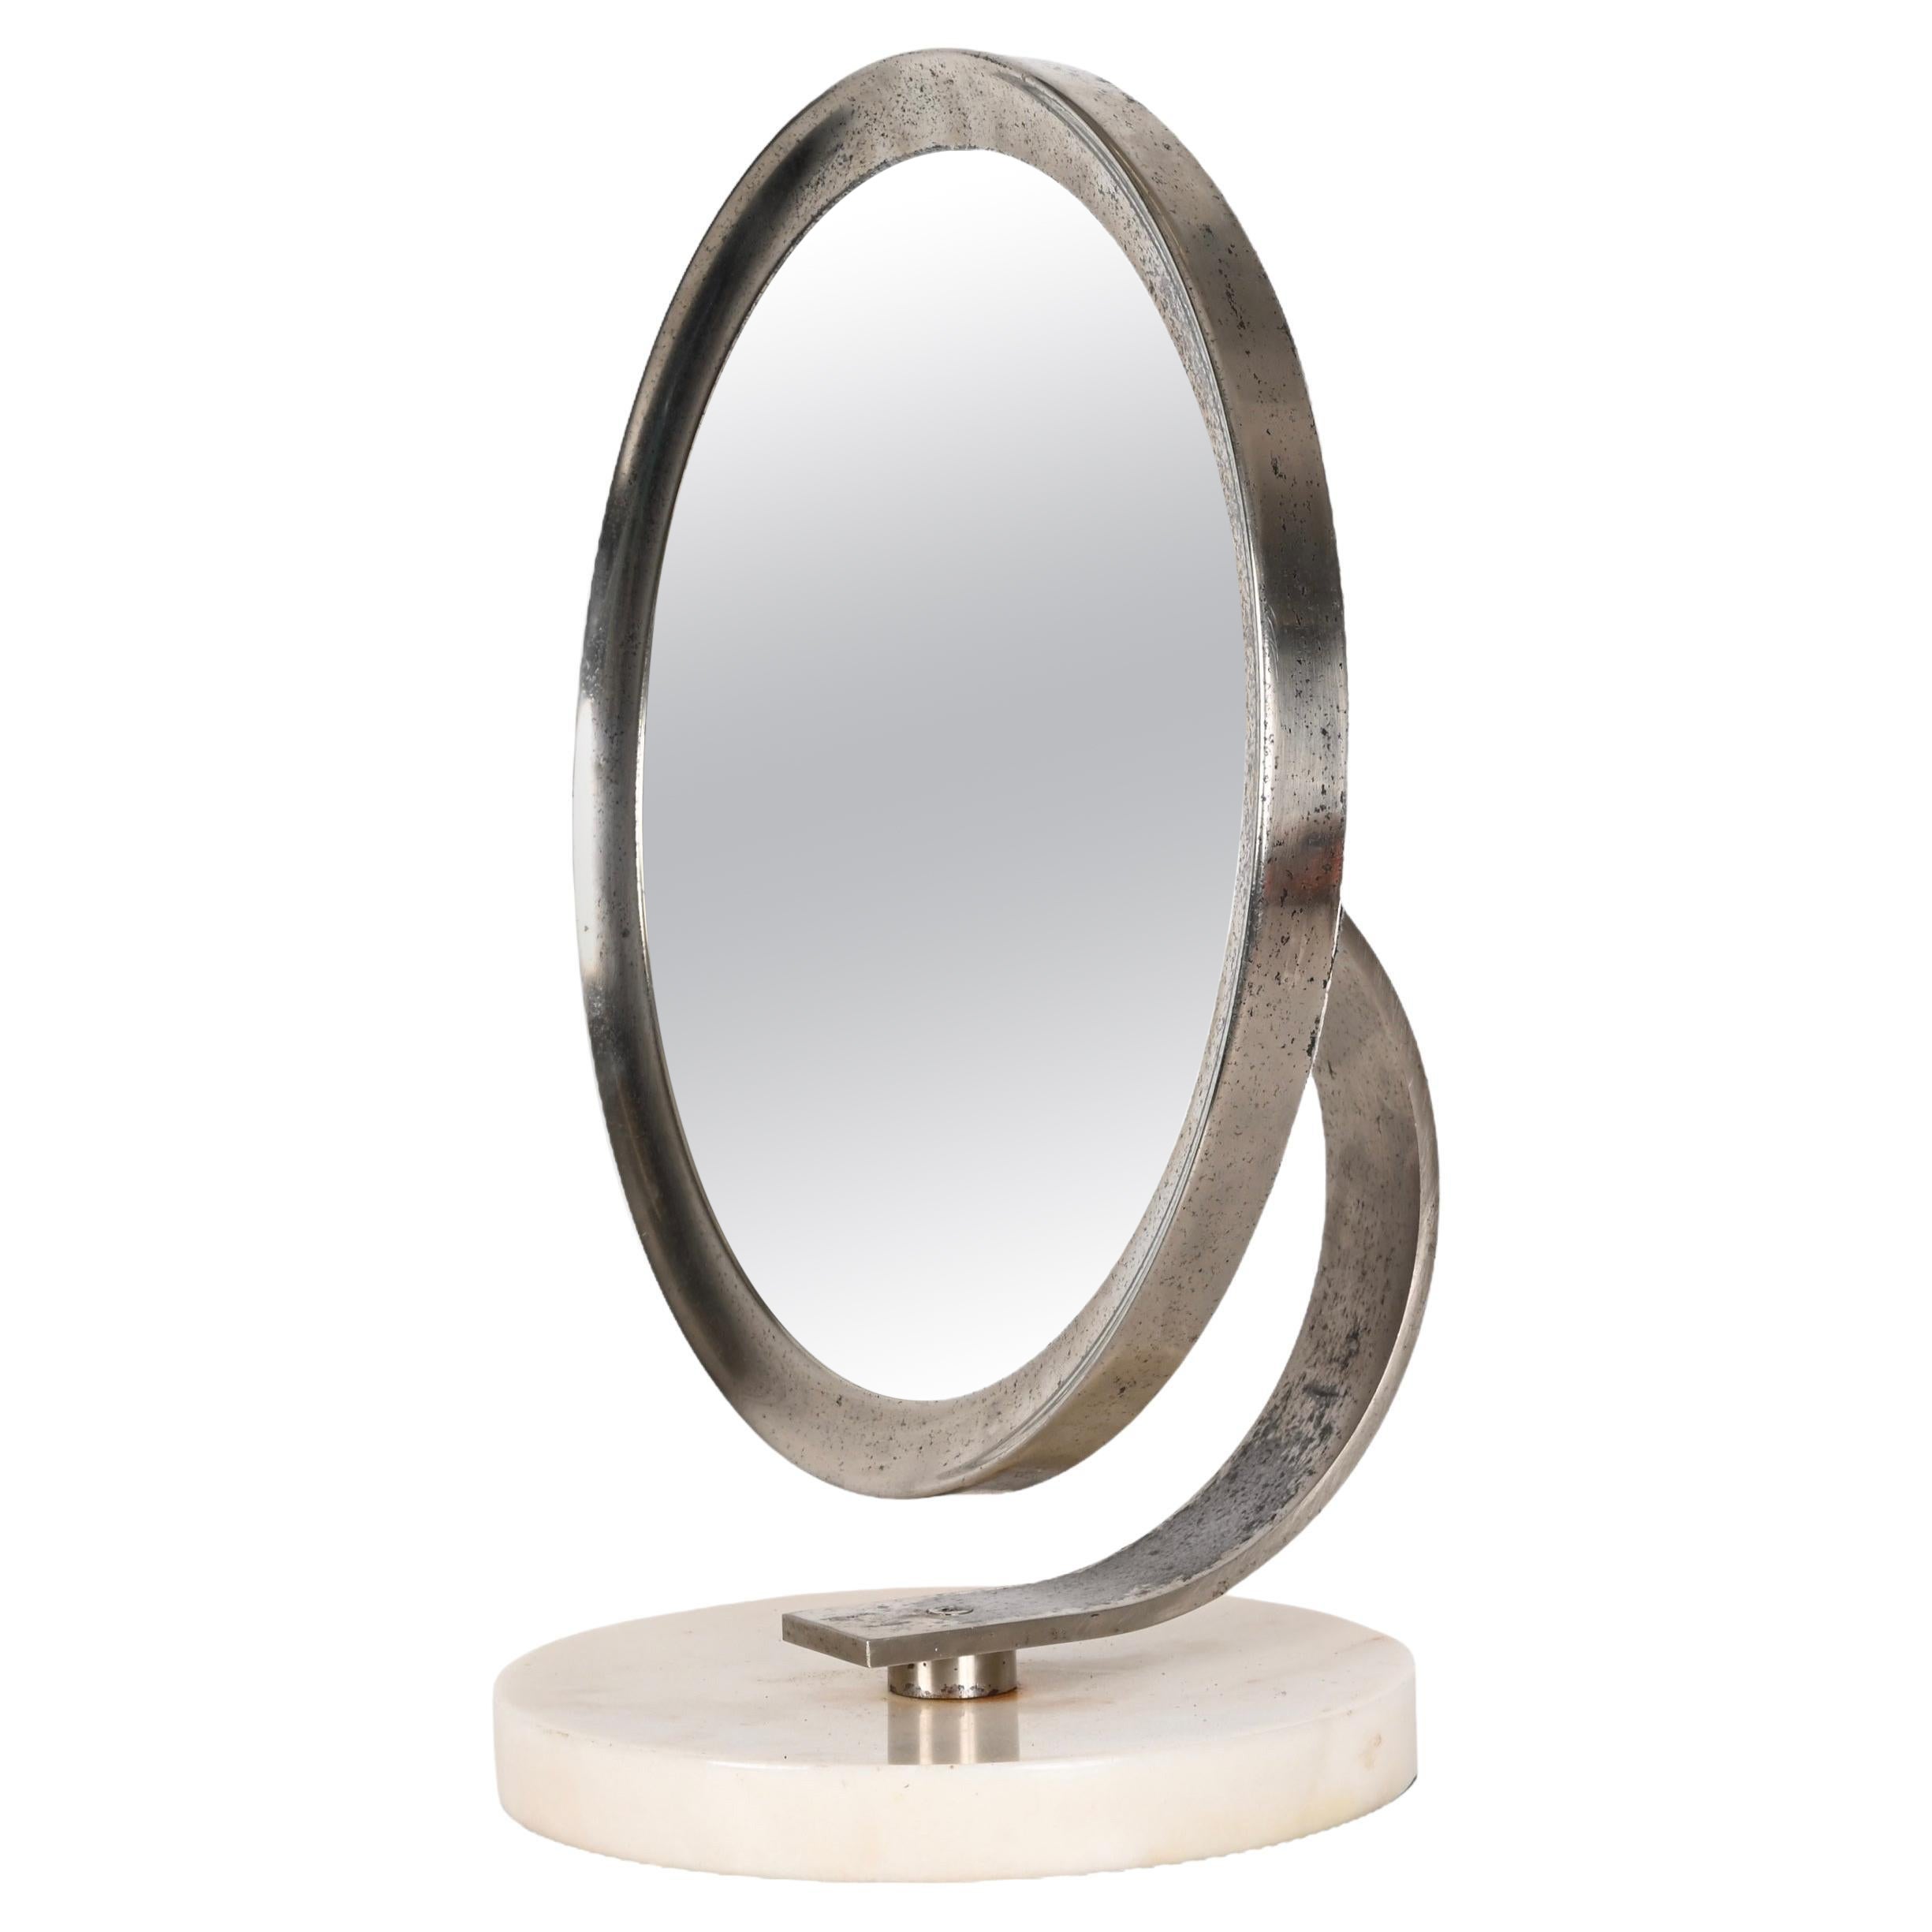 Midcentury Round White Carrara Marble and Steel Italian Dressing Mirror, 1960s For Sale